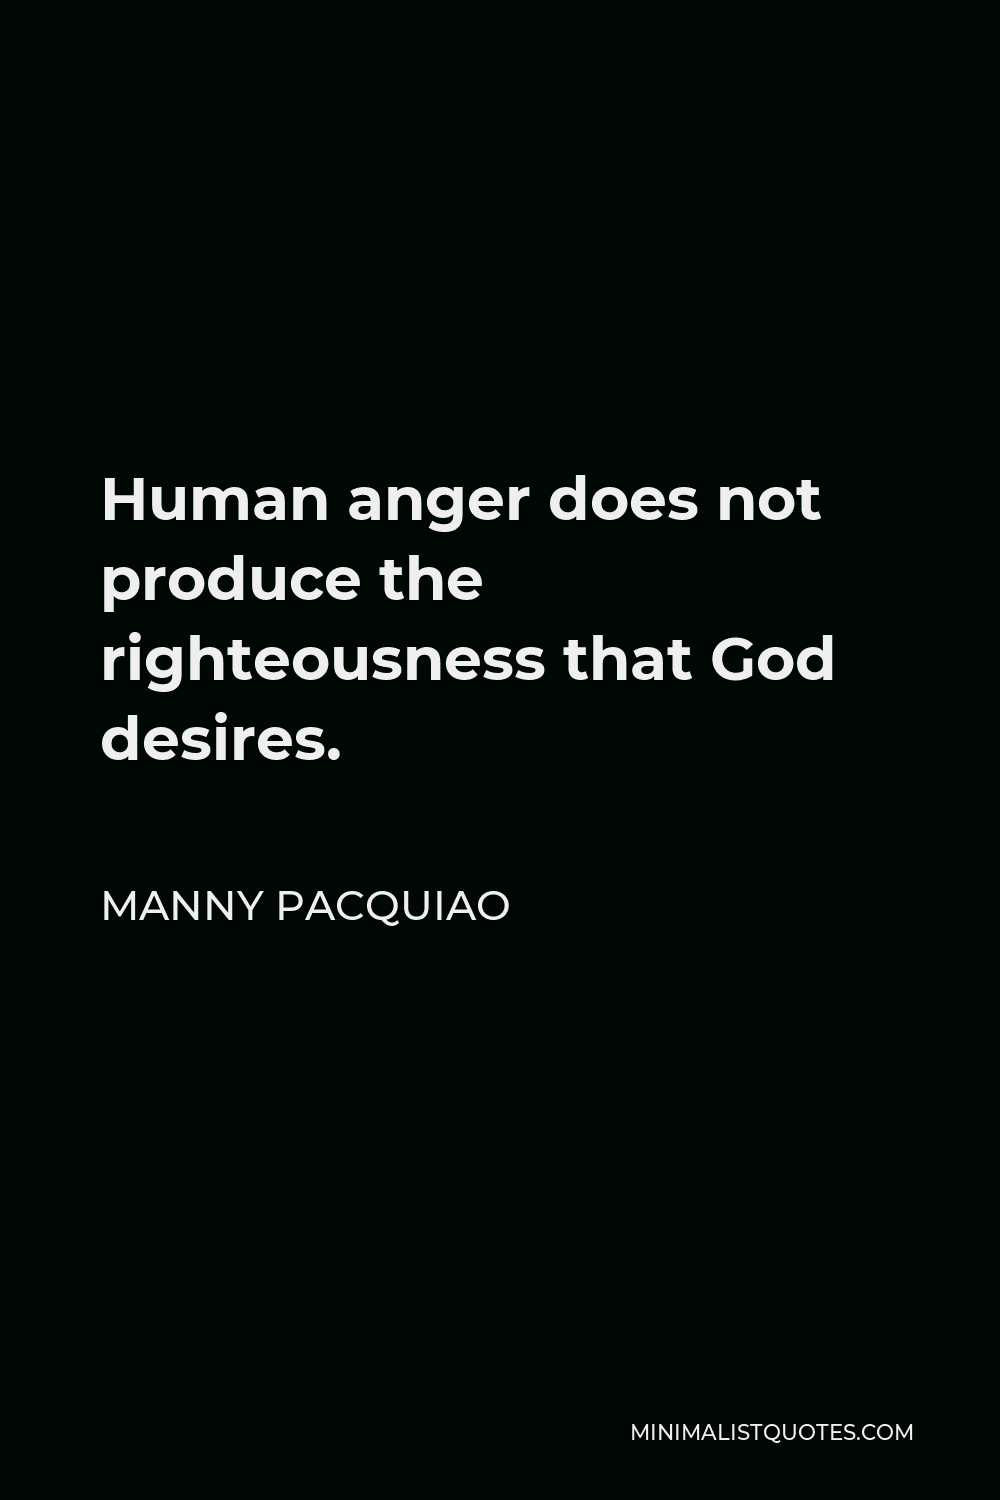 Manny Pacquiao Quote - Human anger does not produce the righteousness that God desires.